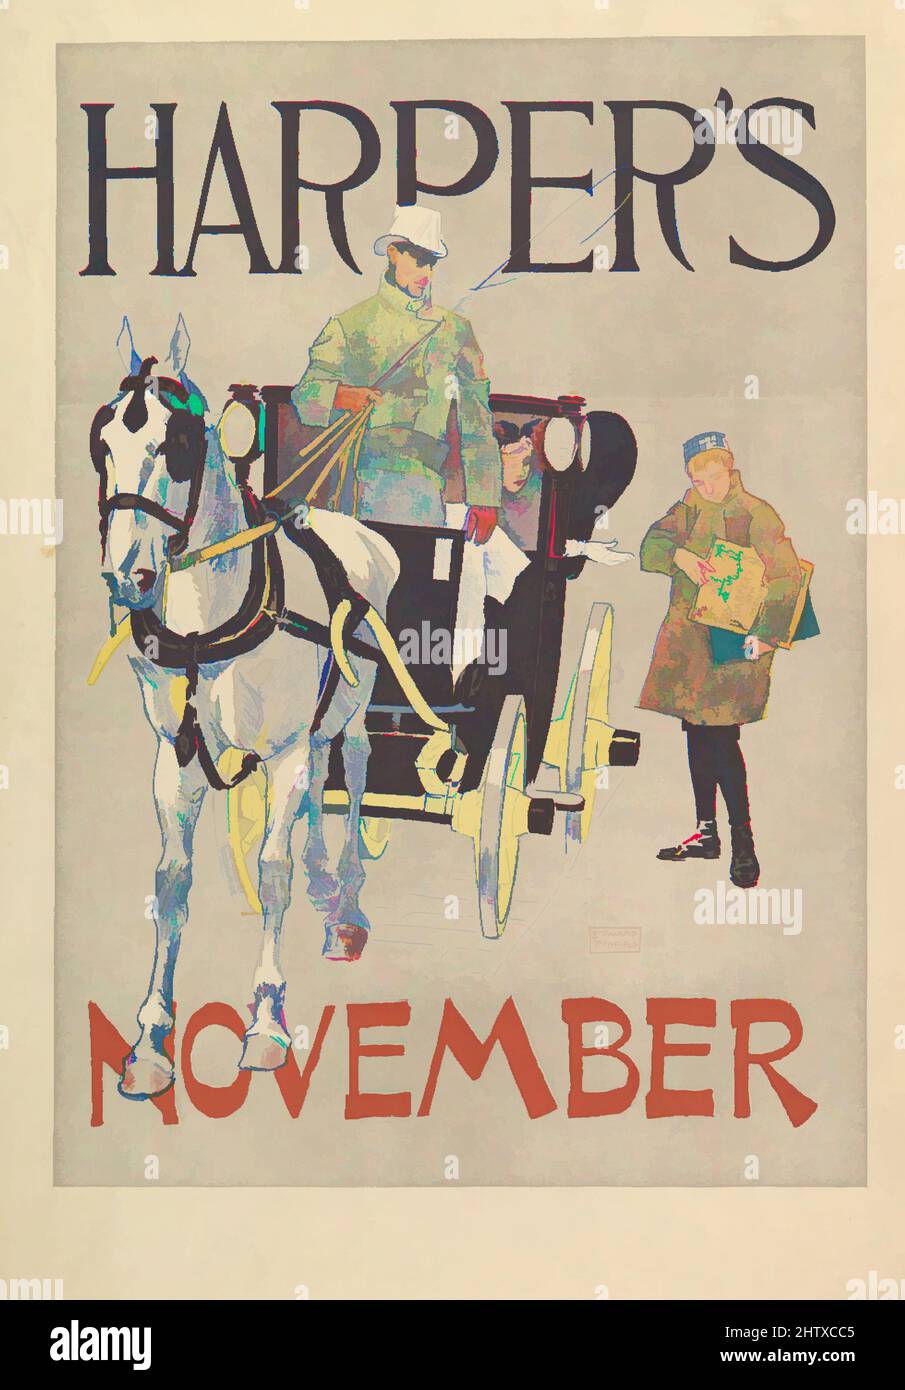 Art inspired by Harper's, November, 1893, Lithograph, Sheet: 19 1/2 × 13 9/16 in. (49.6 × 34.4 cm), Edward Penfield (American, Brooklyn, New York 1866–1925 Beacon, New York, Classic works modernized by Artotop with a splash of modernity. Shapes, color and value, eye-catching visual impact on art. Emotions through freedom of artworks in a contemporary way. A timeless message pursuing a wildly creative new direction. Artists turning to the digital medium and creating the Artotop NFT Stock Photo